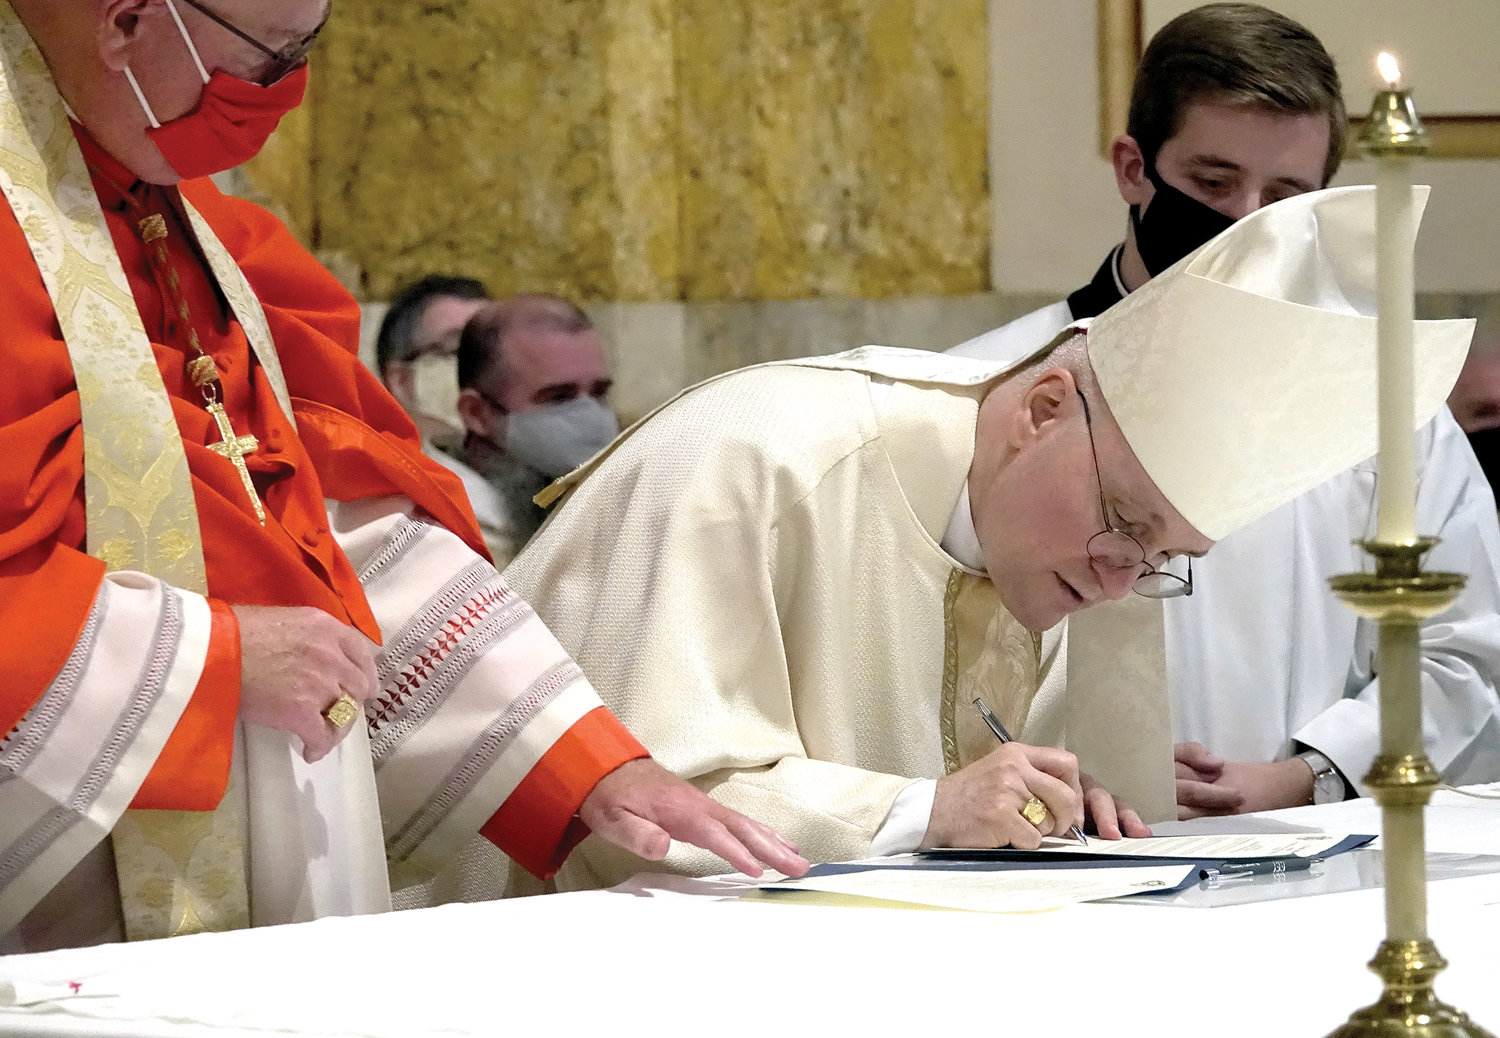 Auxiliary Bishop James Massa of Brooklyn signs oath of fidelity before Cardinal Dolan at the Sept. 13 Mass in which the bishop was officially installed as rector of St. Joseph’s Seminary, Dunwoodie.